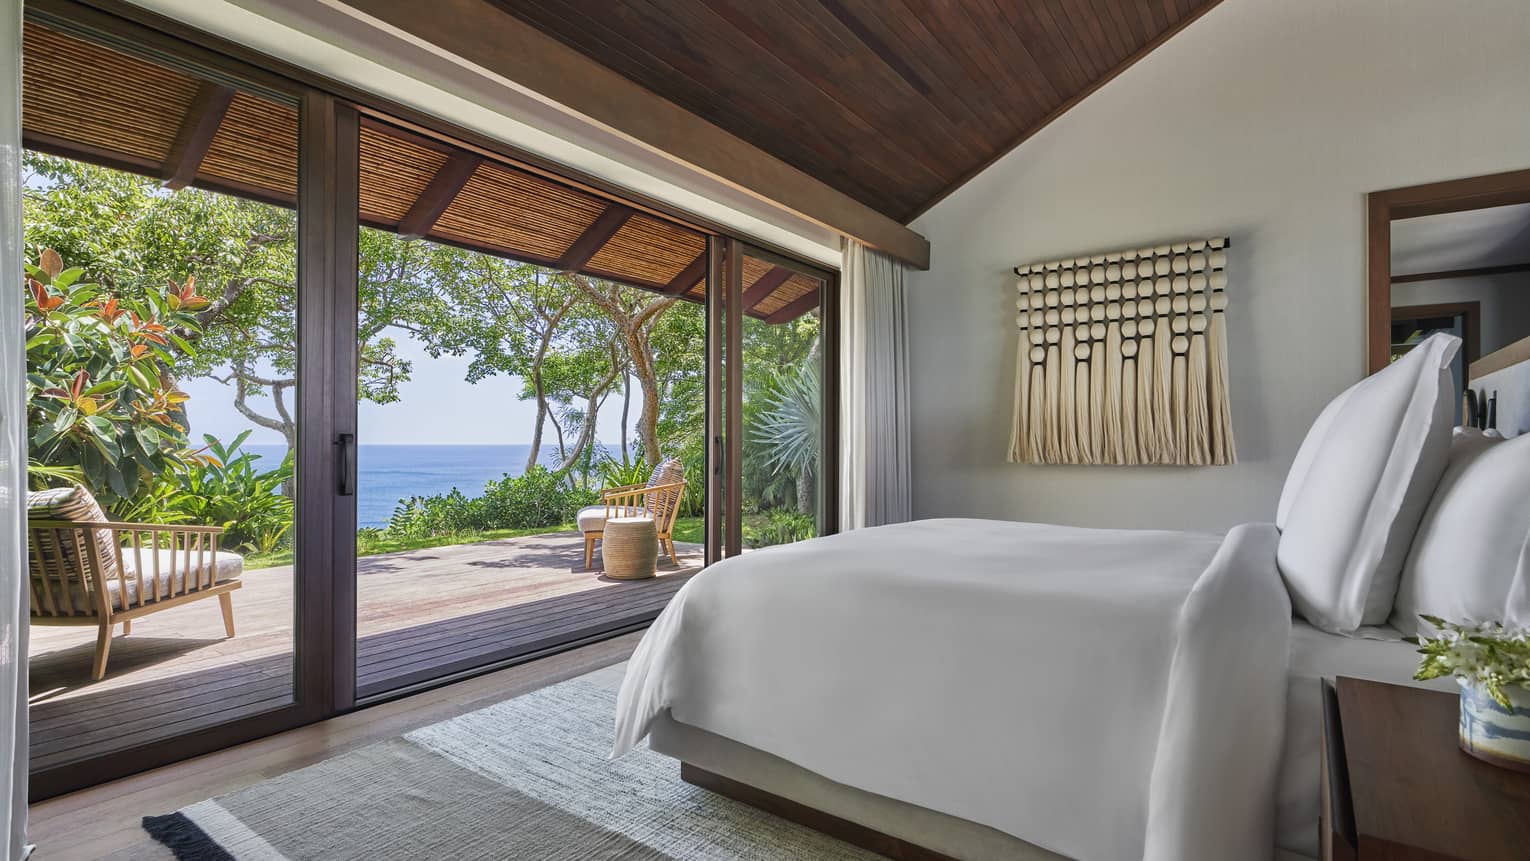 Bedroom with king bed, facing sliding doors that lead out to a private terrace with garden and sea views